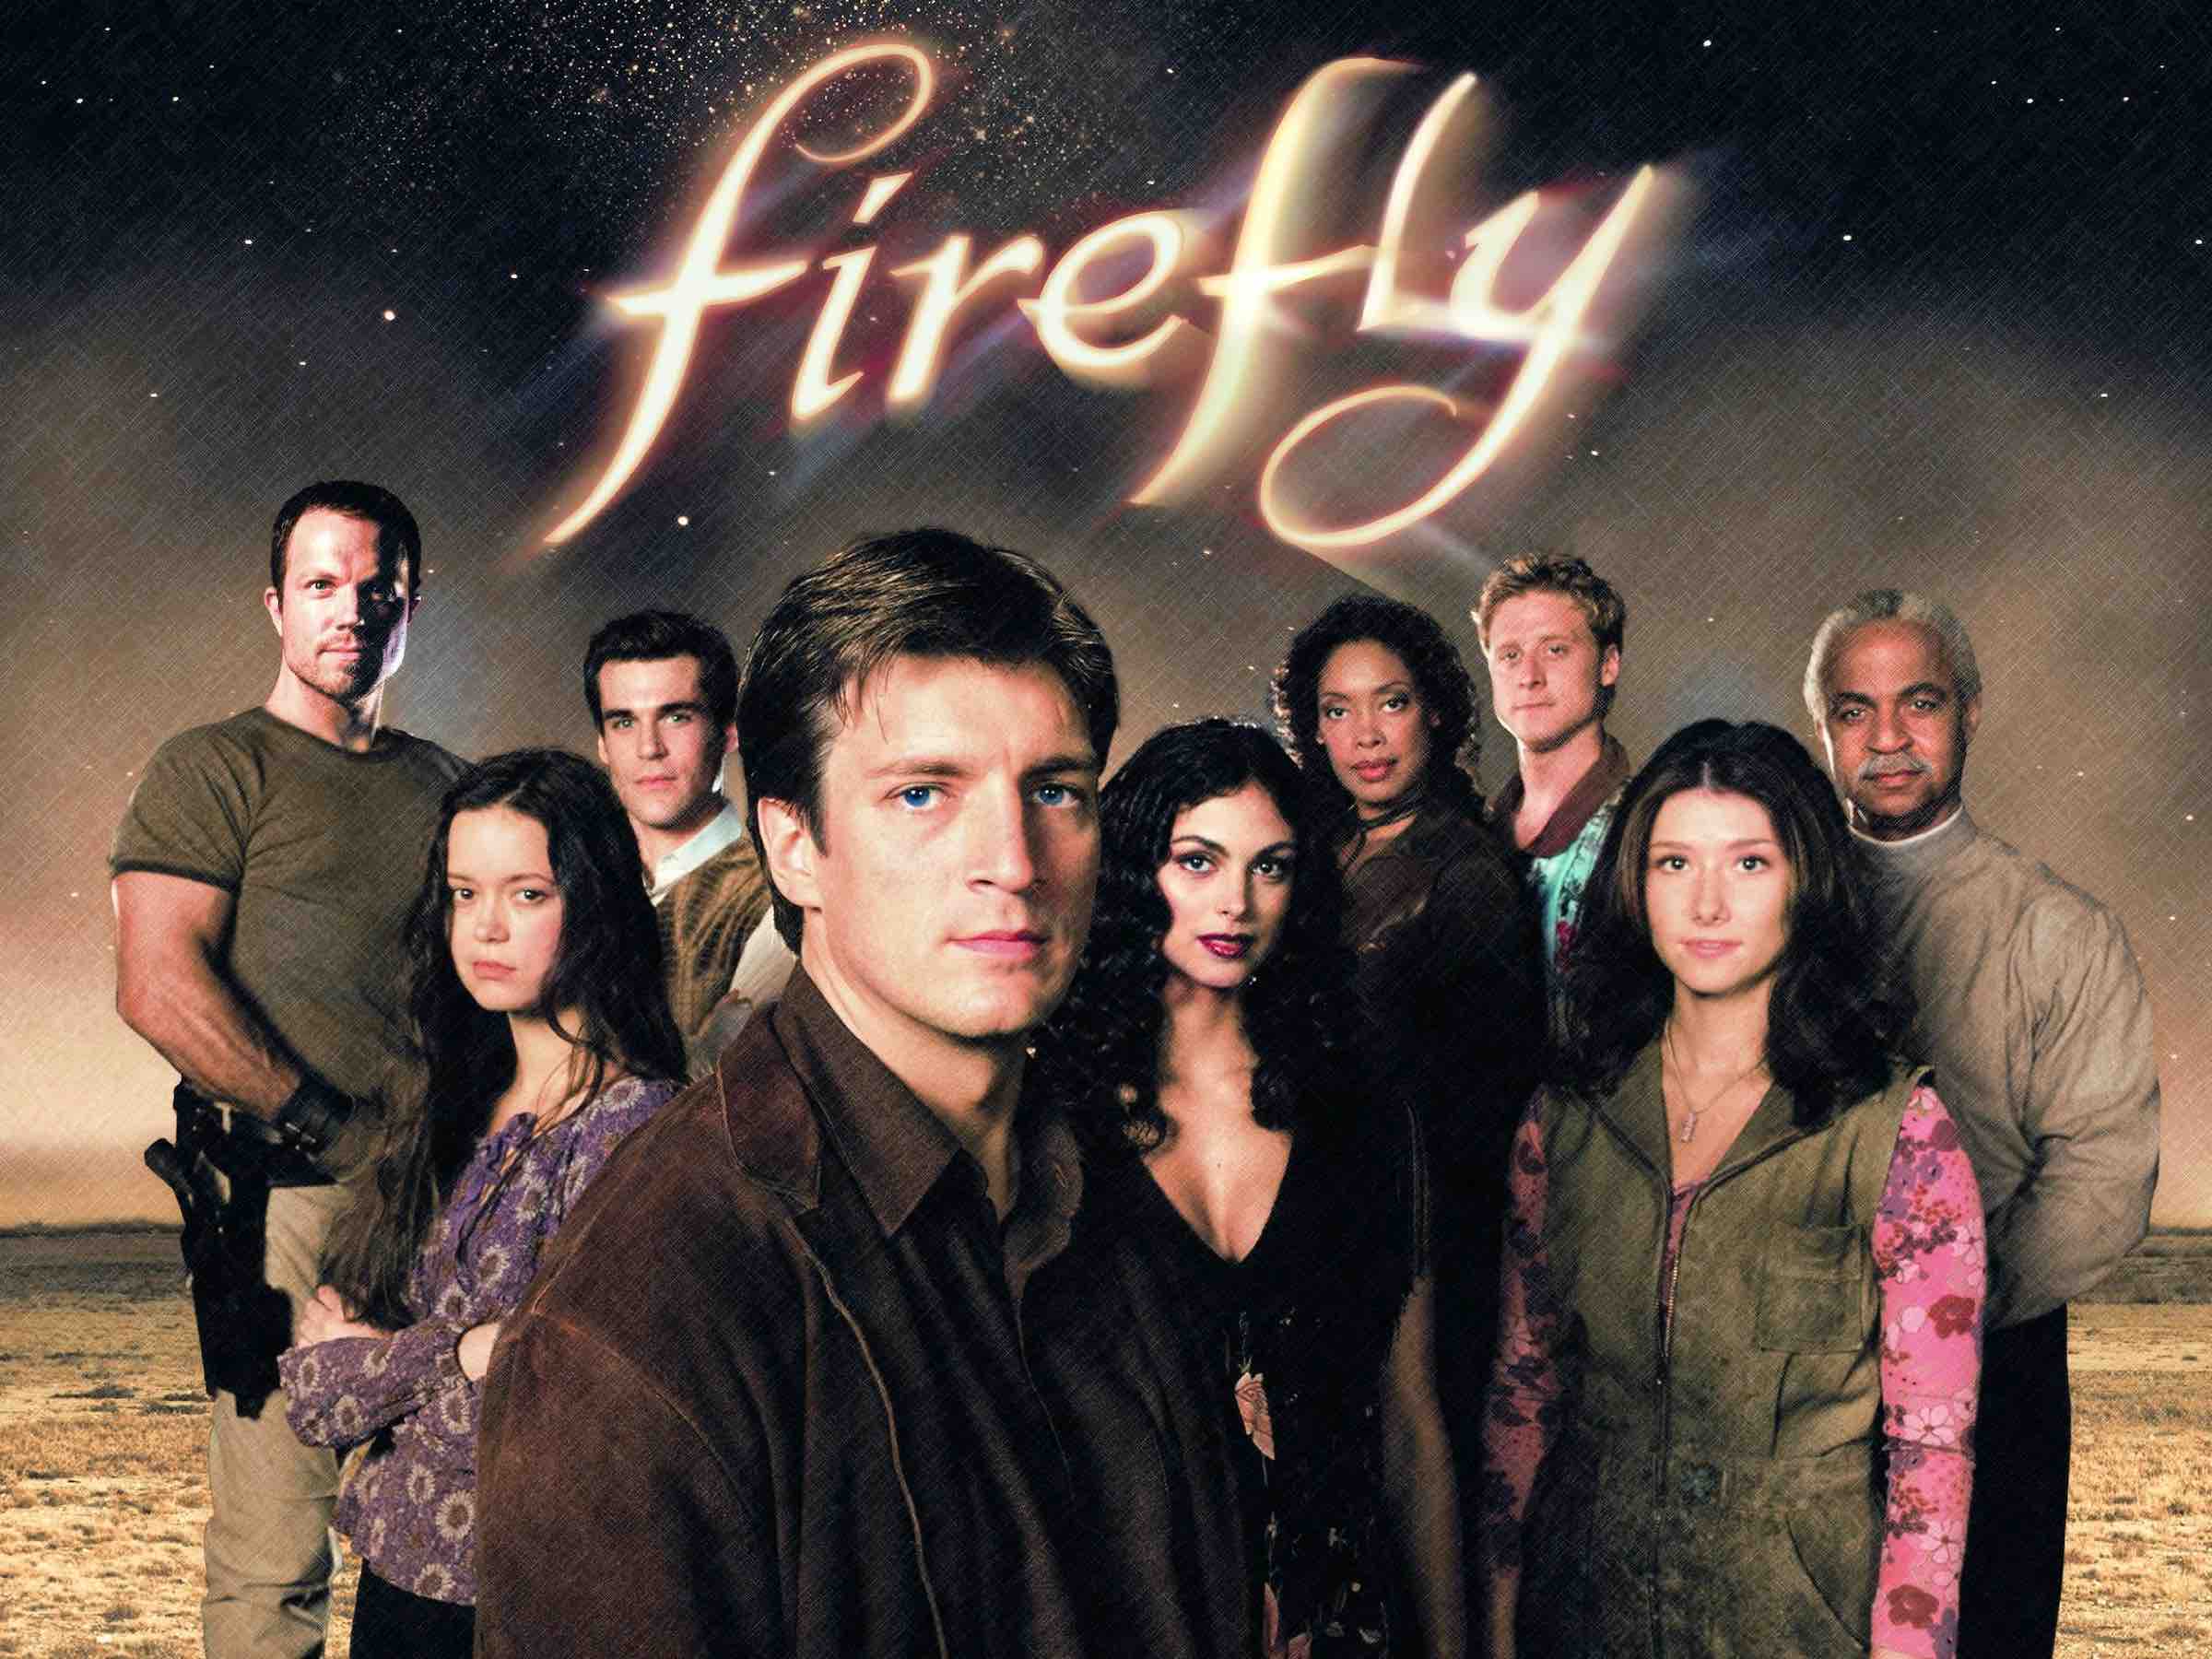 Let’s revisit ancient history and start weeping anew at the legendary show. Test your 'Firefly' knowledge with Film Daily's exclusive quiz. Shiny? Shiny.